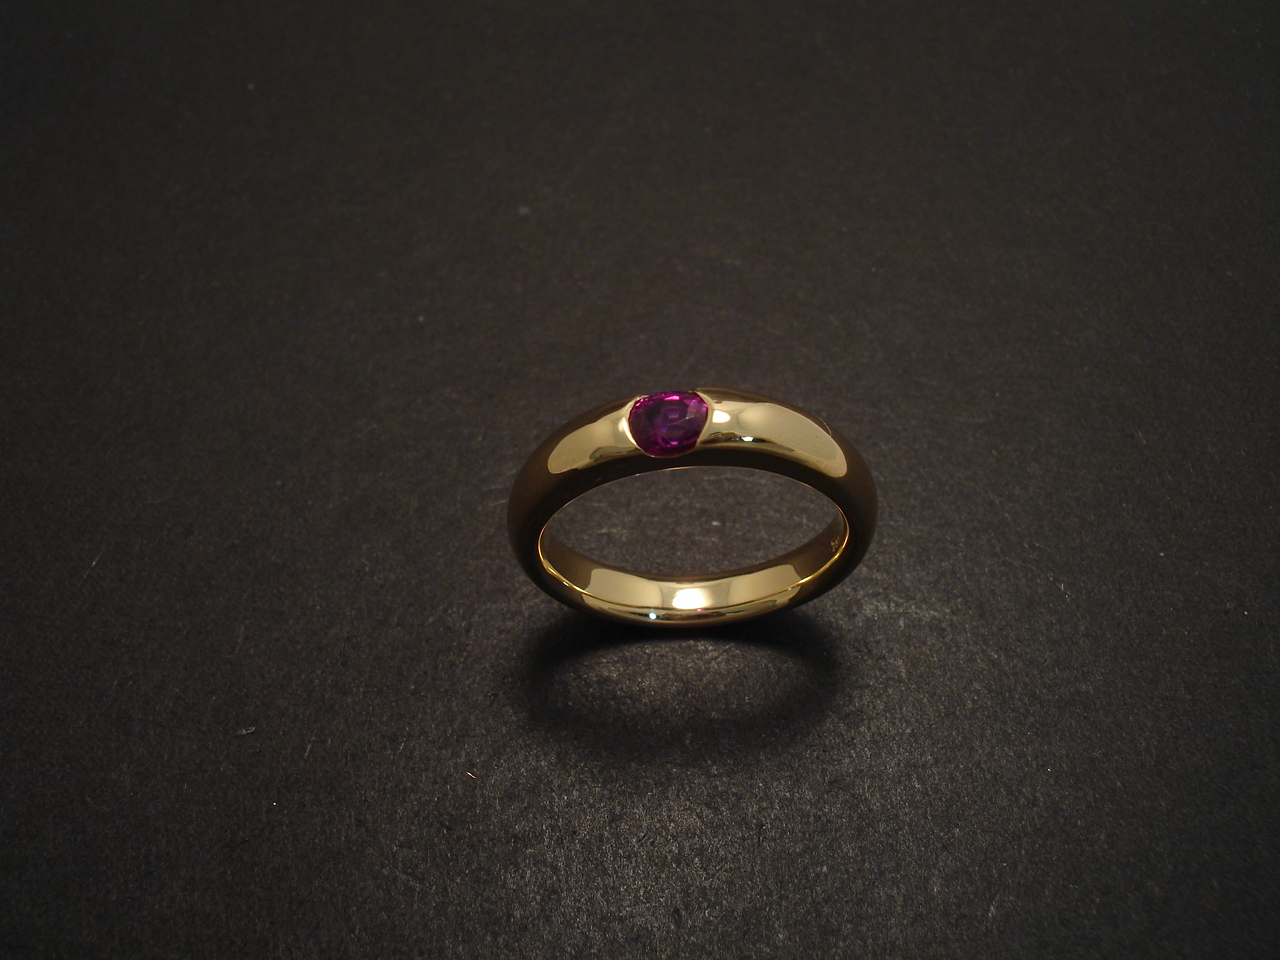 Less Plain, Please: 18ct Gold/Ruby Ring - Christopher William Sydney ...